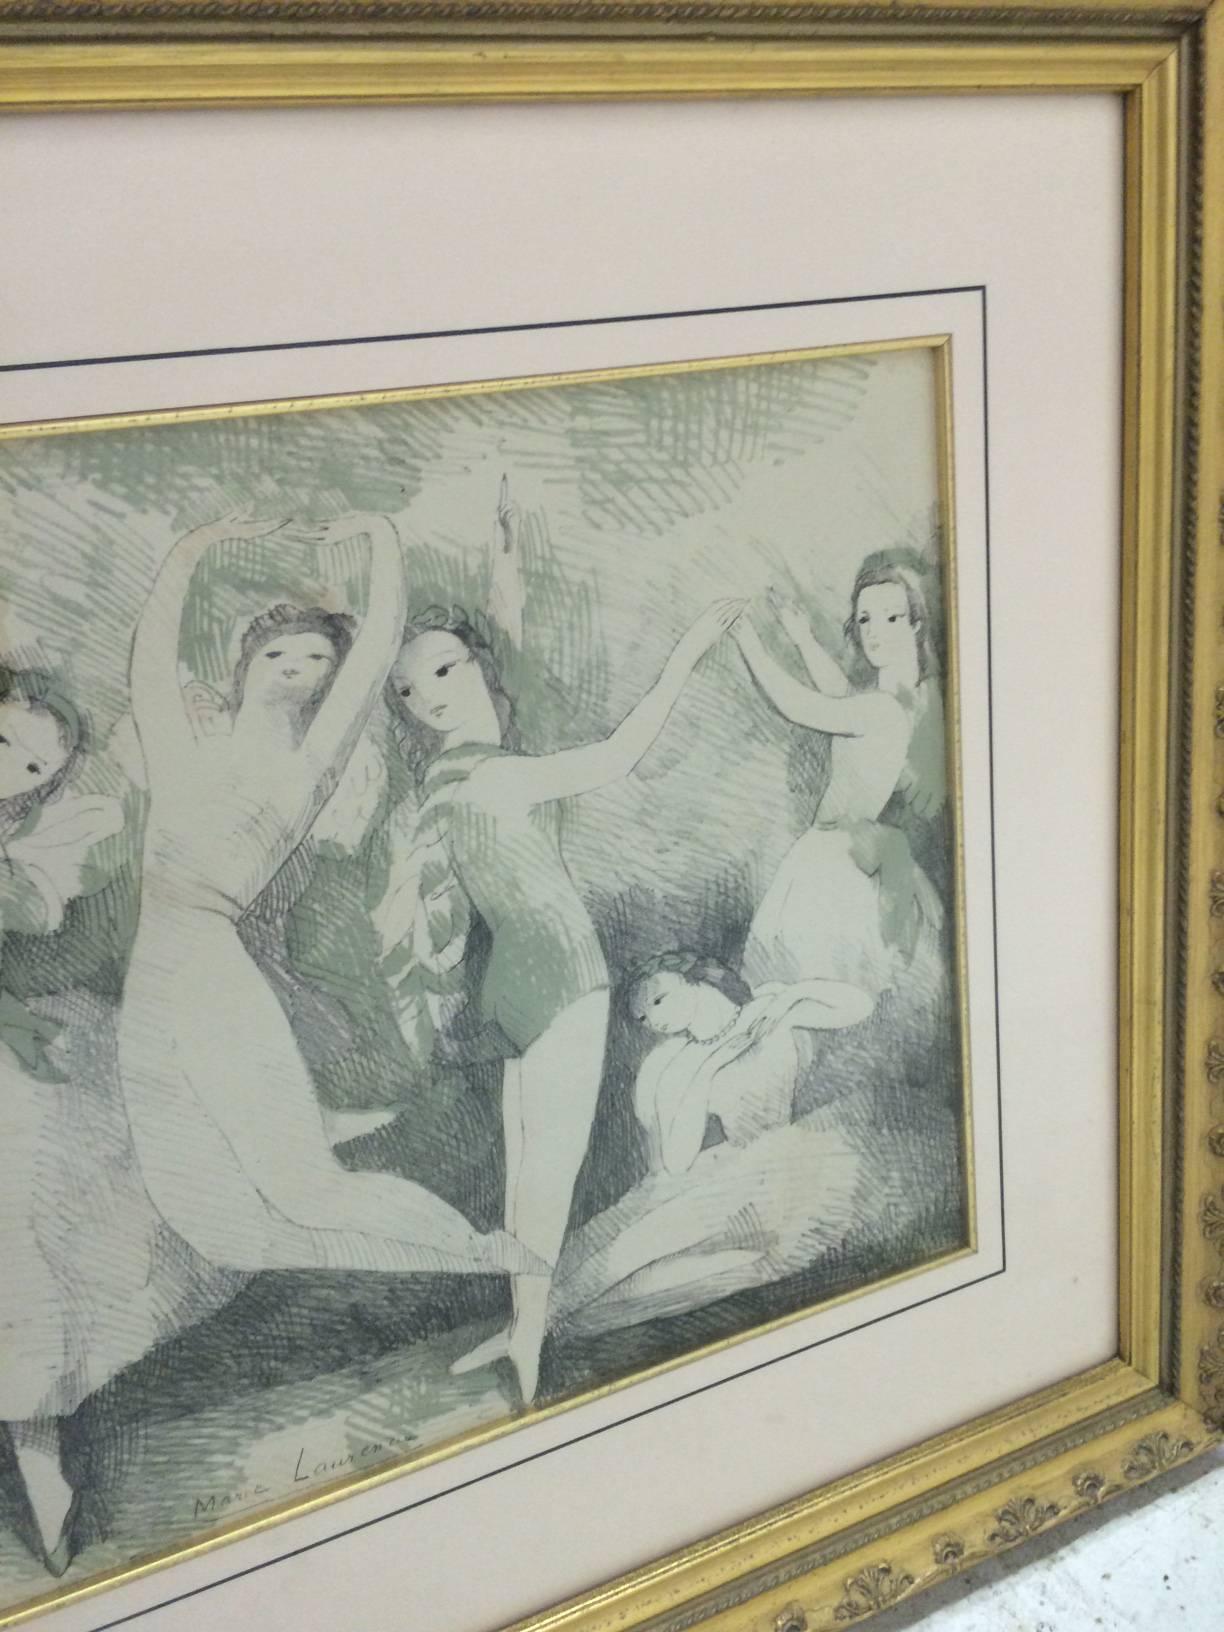 This lithograph after an artwork by the painter Marie Laurencin in a cool green pallete shows a lightness of touch and impressive drafting skills. 
Printed by the Chacalgraphie du Louvre in an open edition
CR reference: Marchesseau 187

The